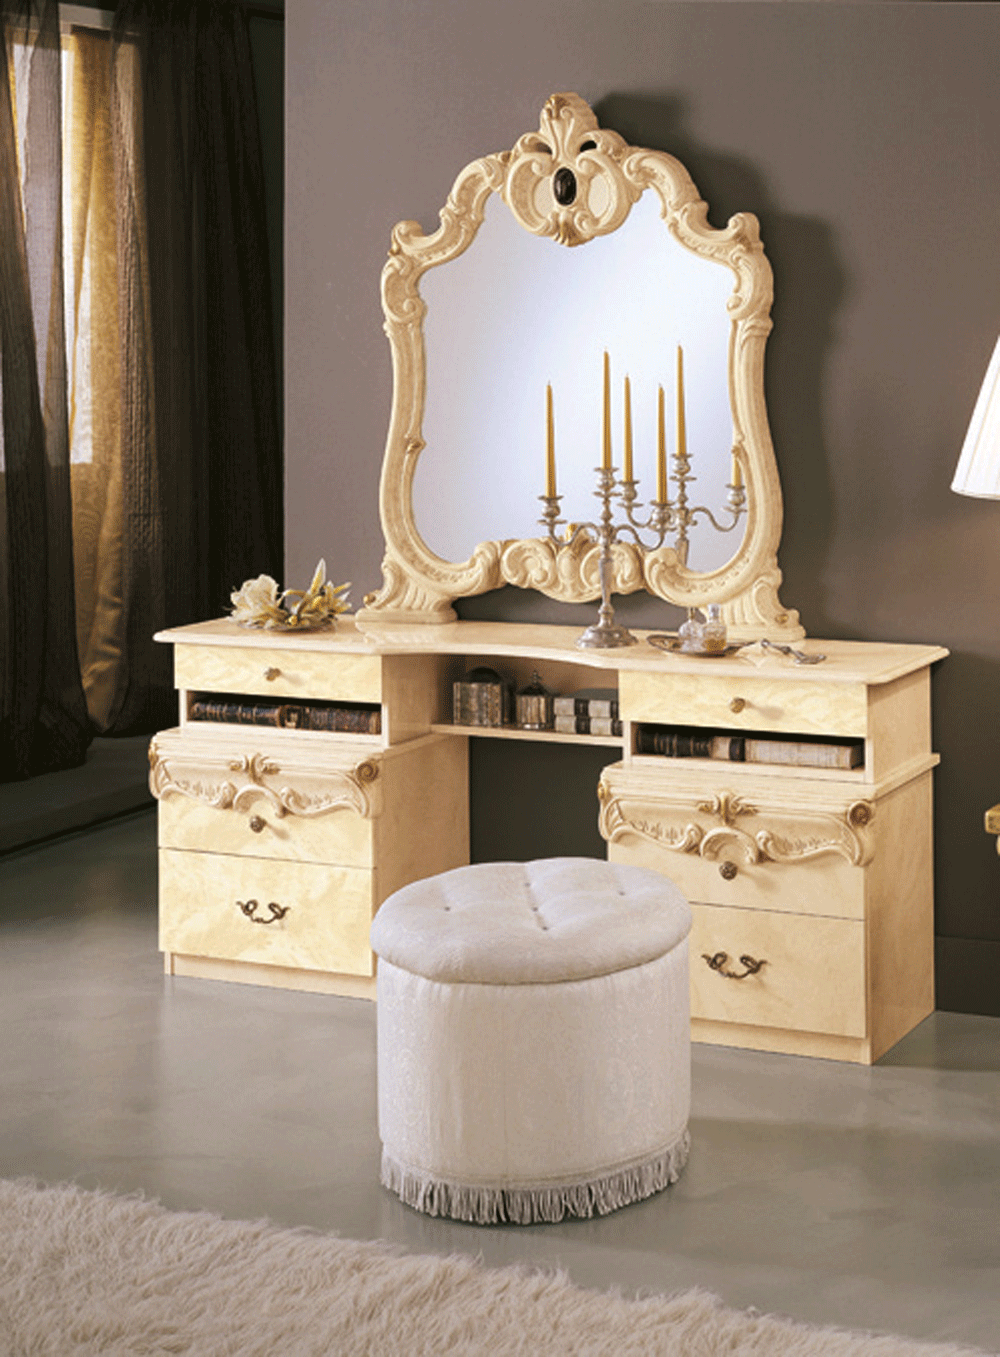 Brands Camel Gold Collection, Italy Barocco Vanity Dresser IVORY